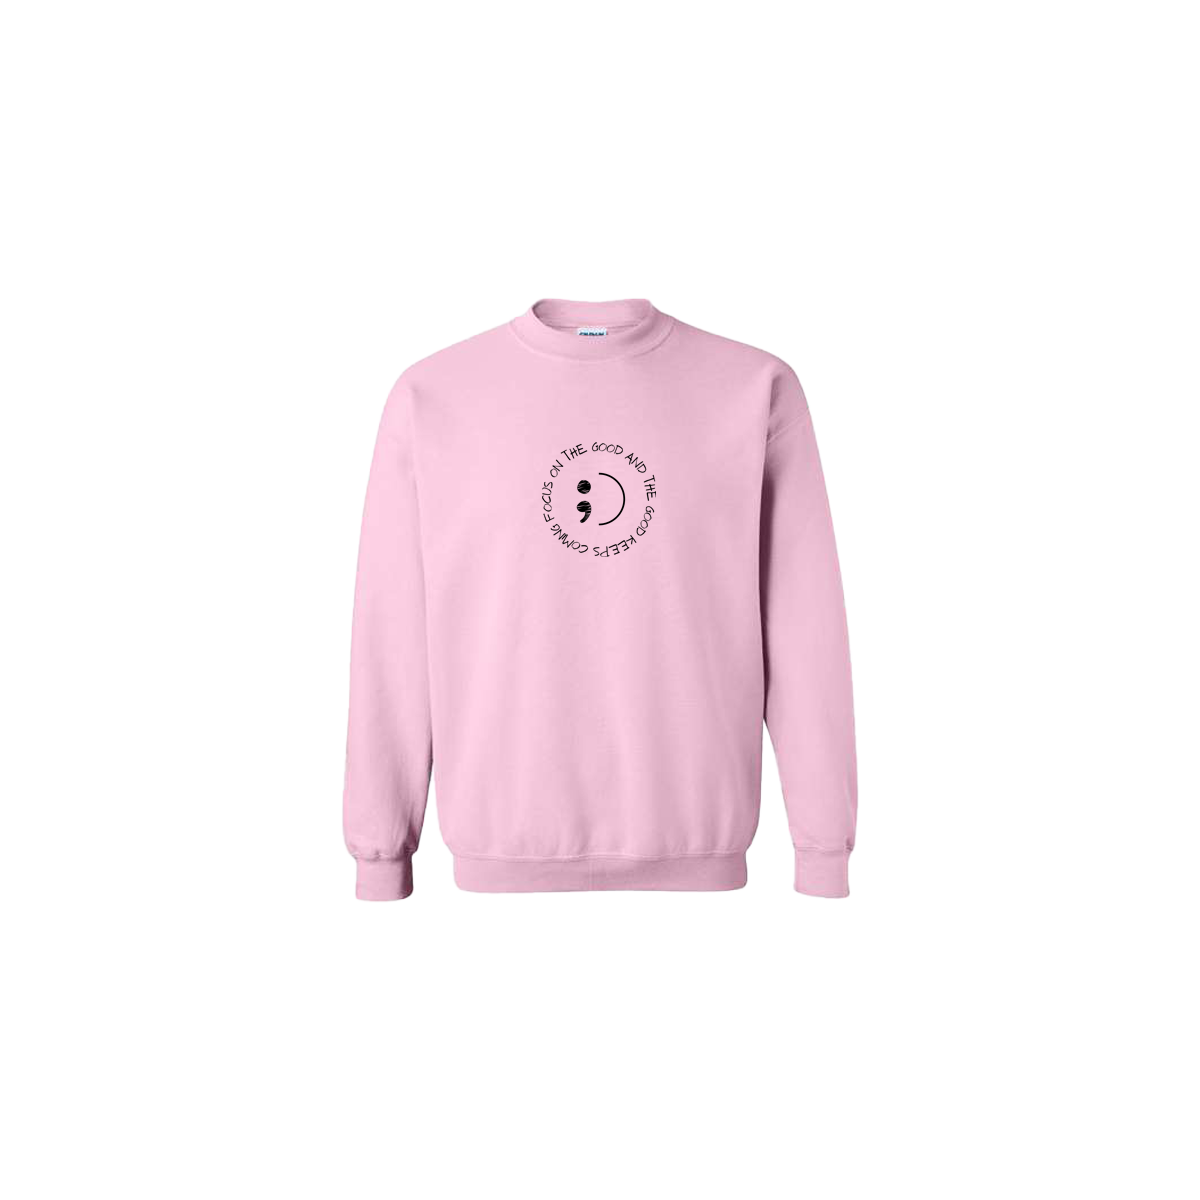 Focus on The Good And The Good Keeps Coming Embroidered Light Pink Crewneck - Mental Health Awareness Clothing